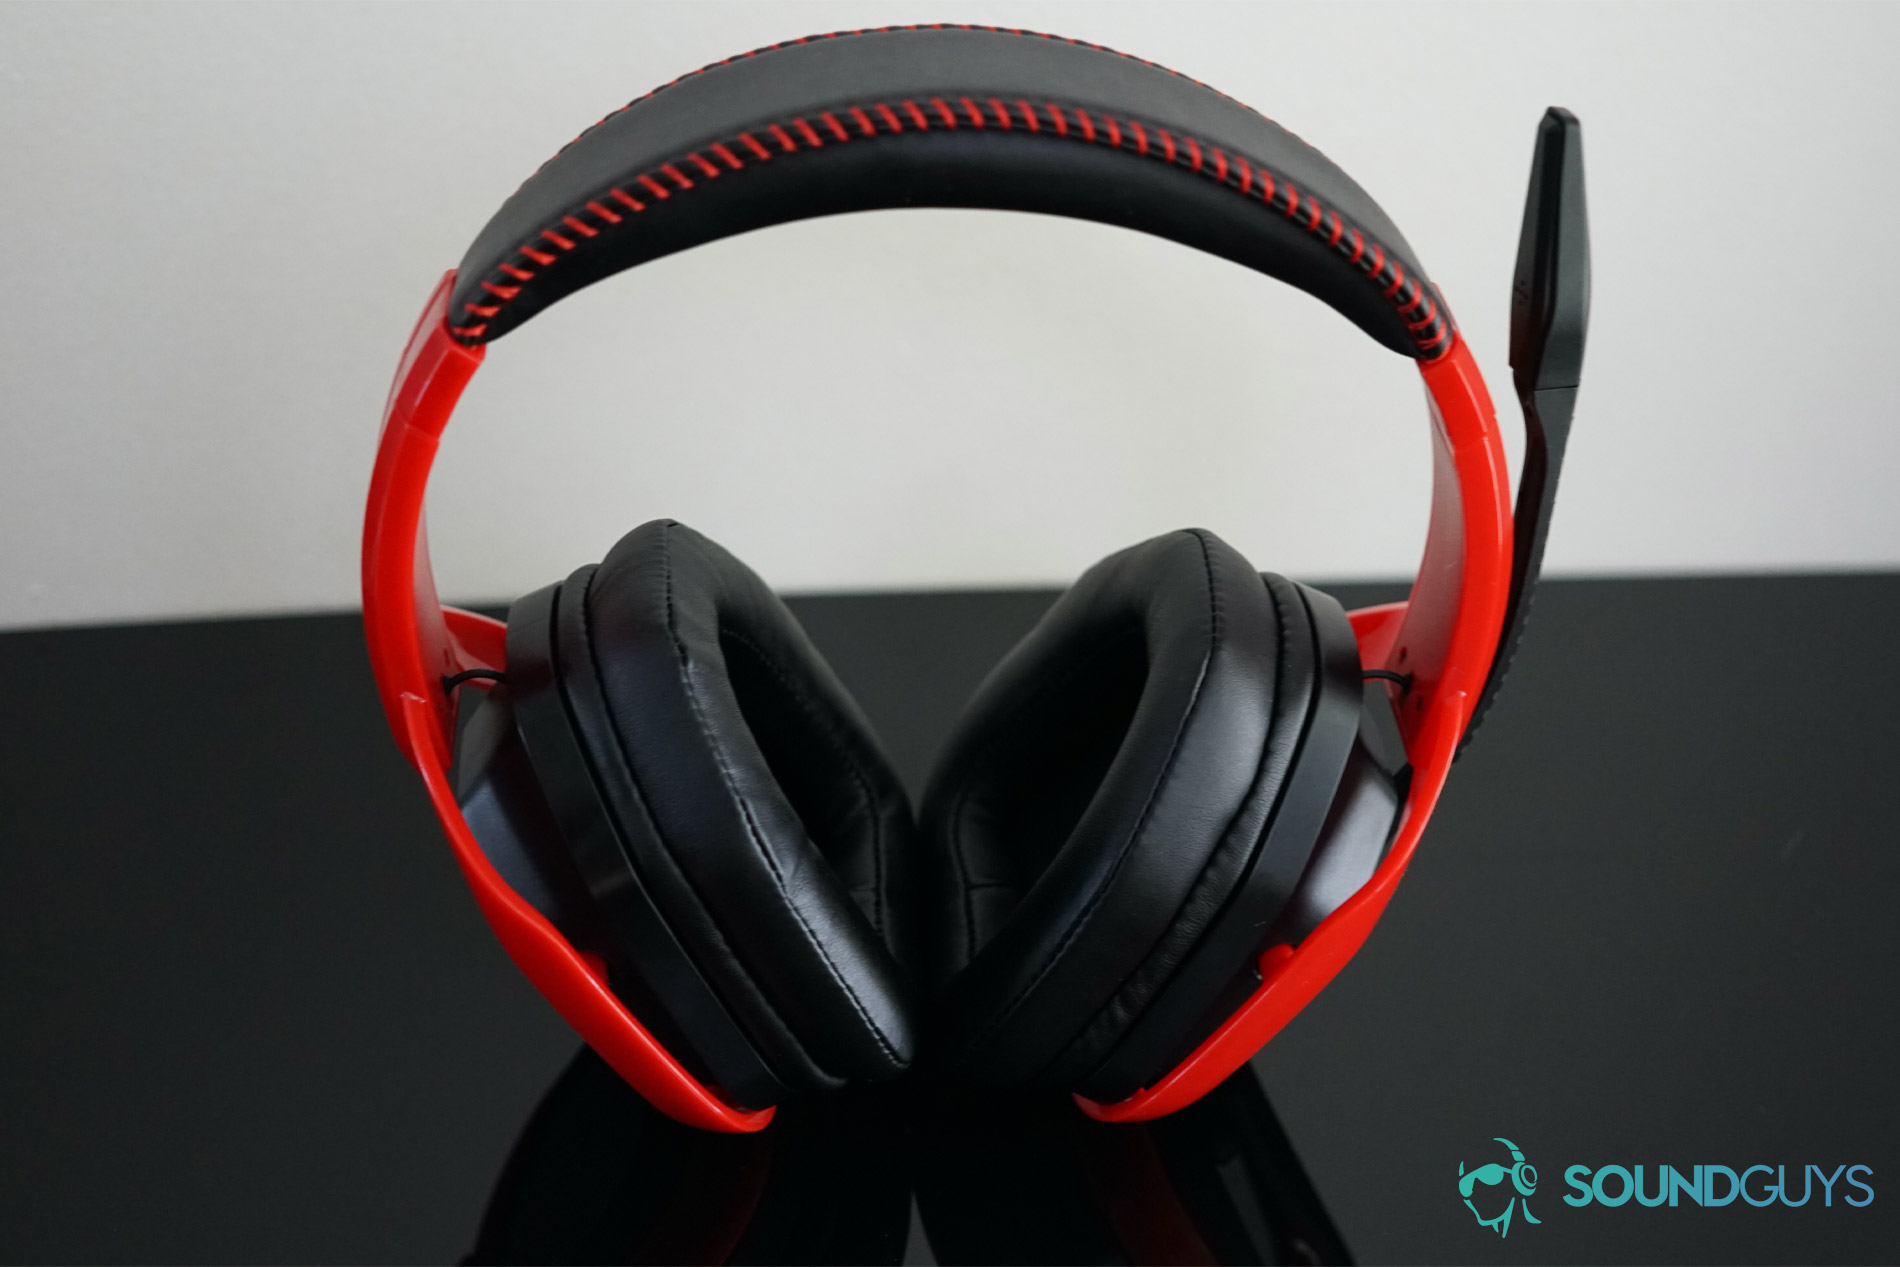 The AmazonBasics Pro Gaming Headset in full view.